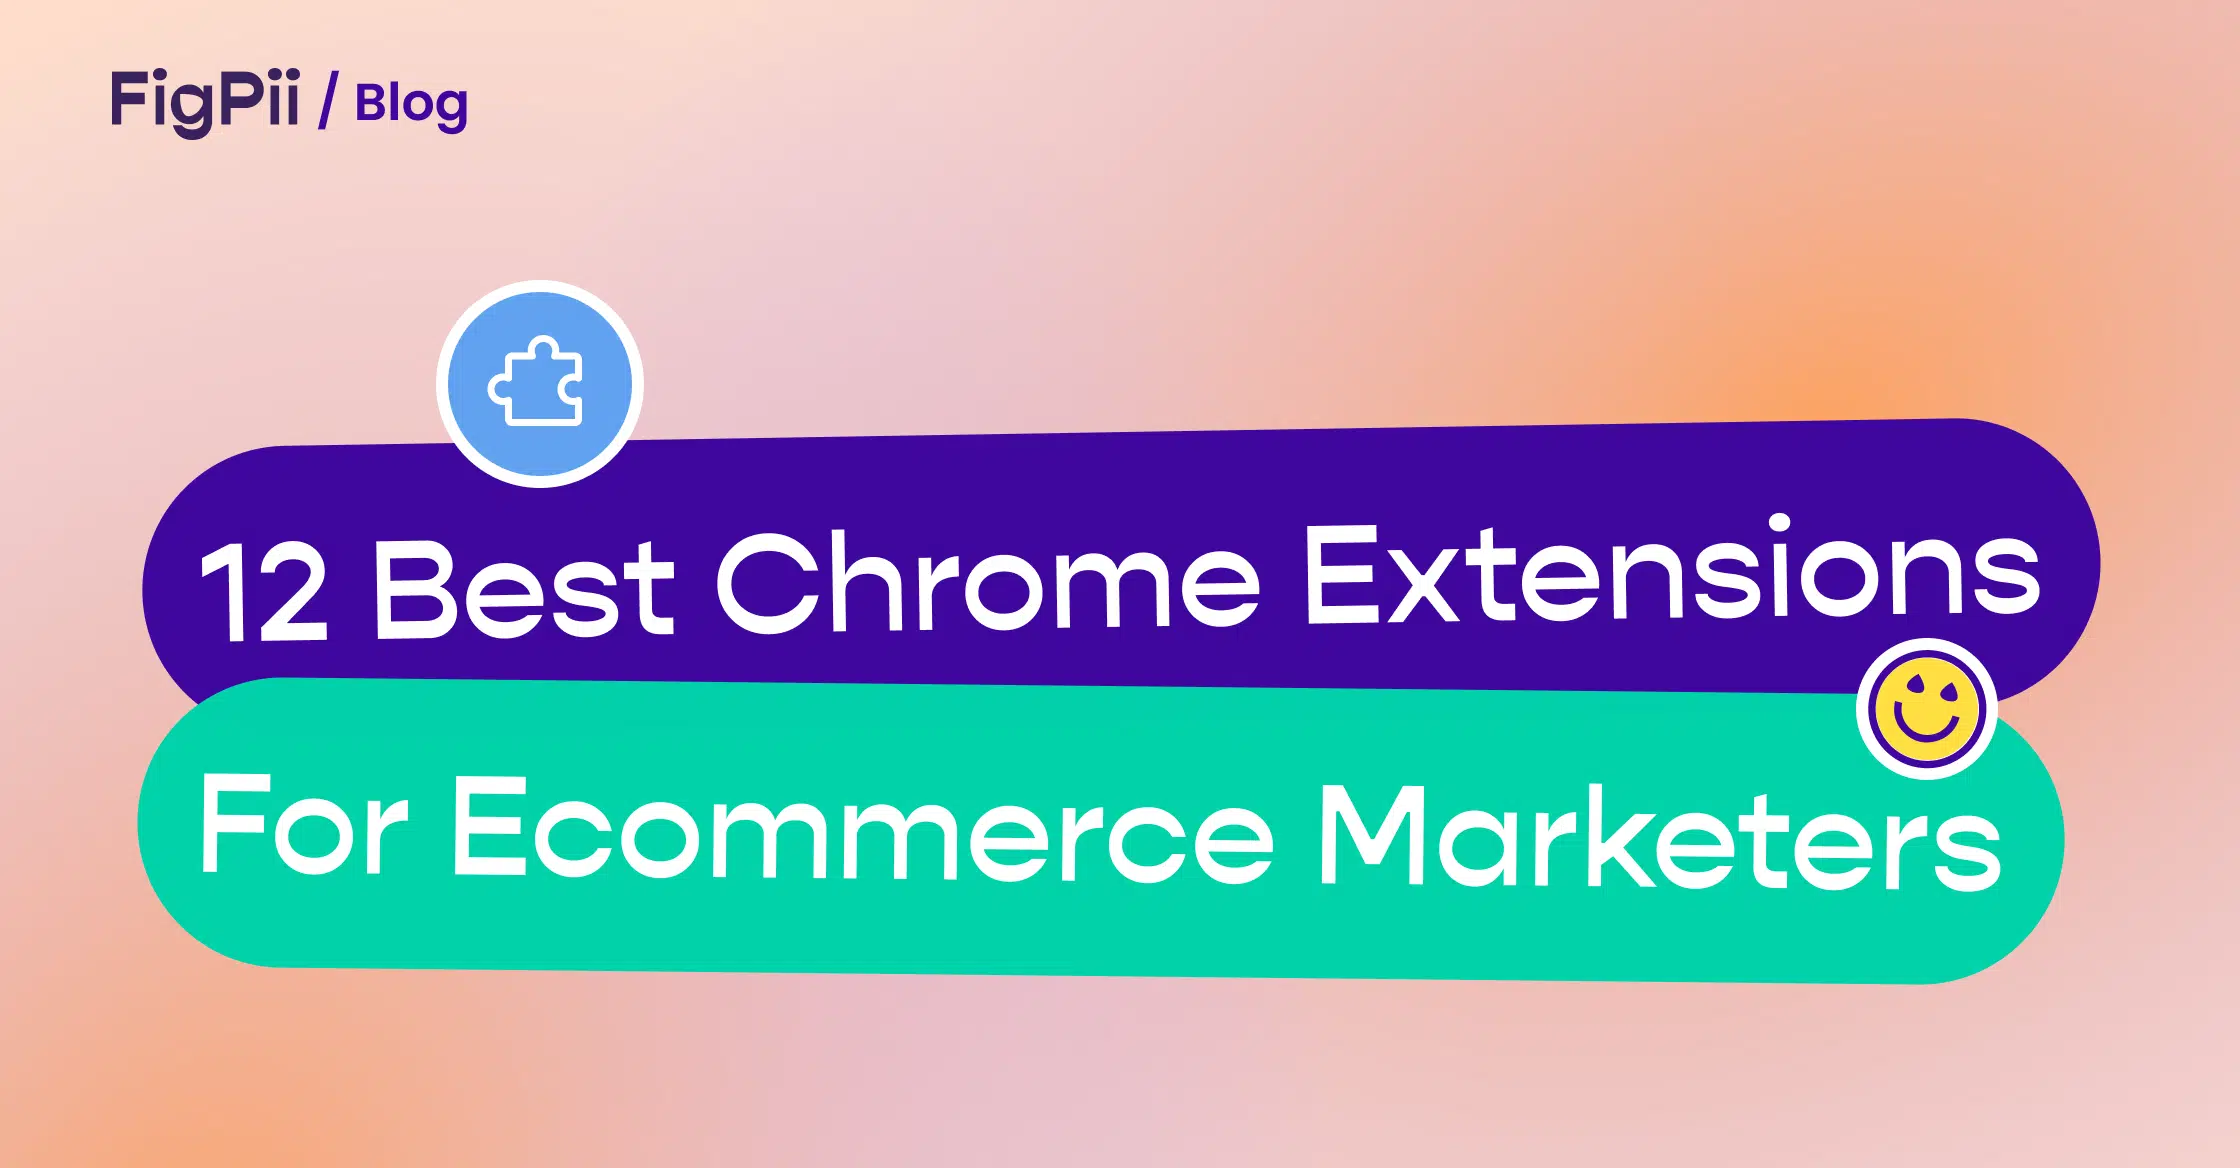 12 Best Chrome Extensions for Ecommerce Marketers - FigPii blog